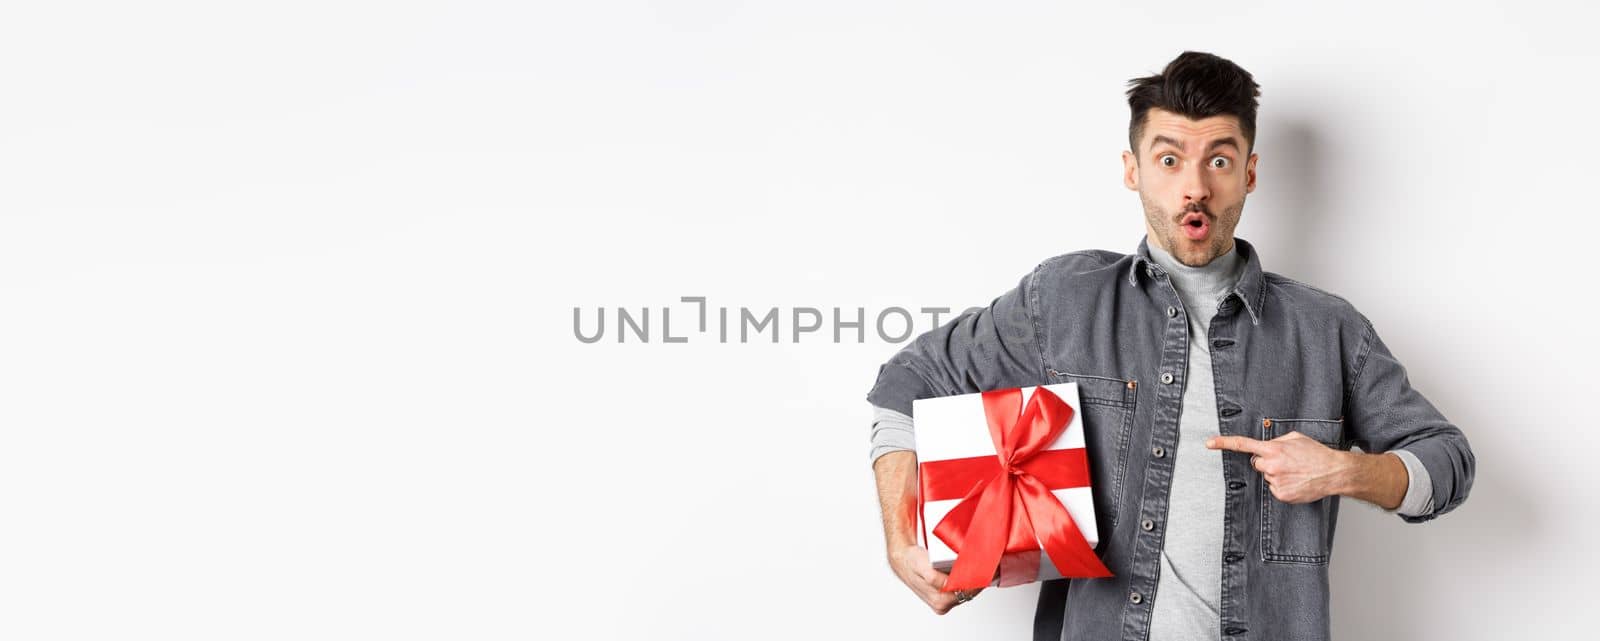 Happy Valentines day. Man shopping for romantic date, pointing at gift box and looking amazed, saying wow impressed, showing lover present, white background.